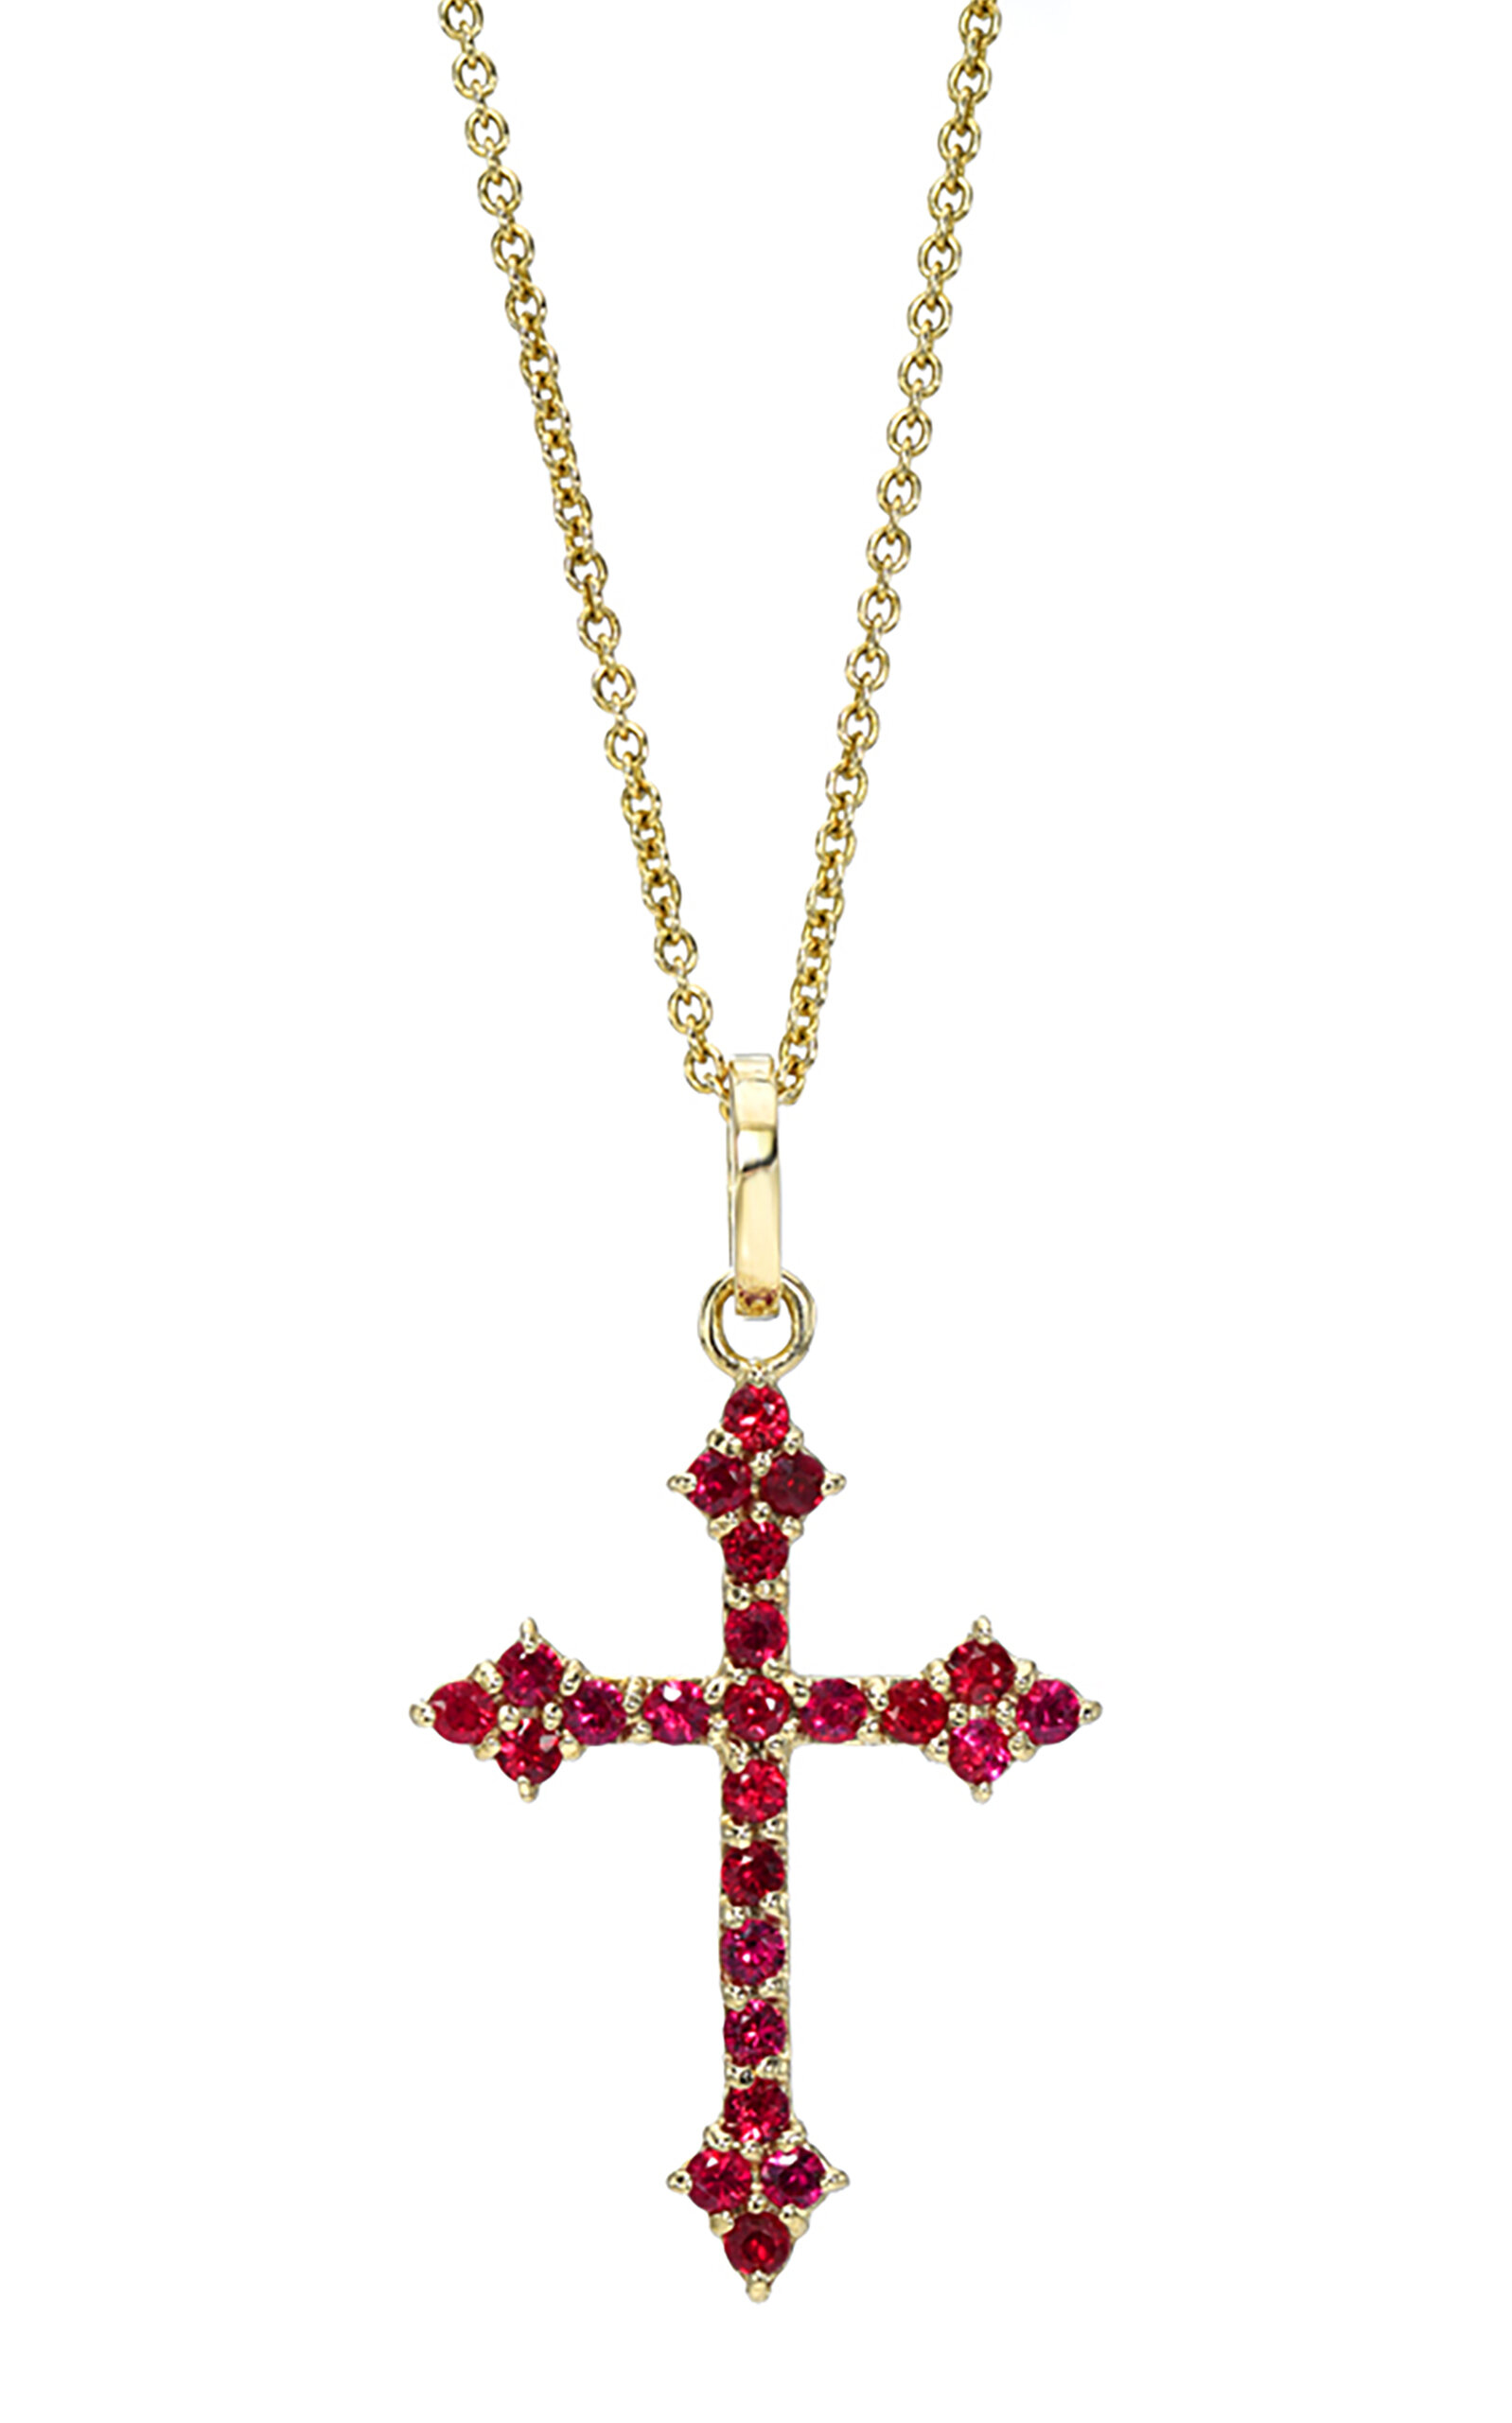 Gothic Cross 14K Yellow Gold Ruby Necklace